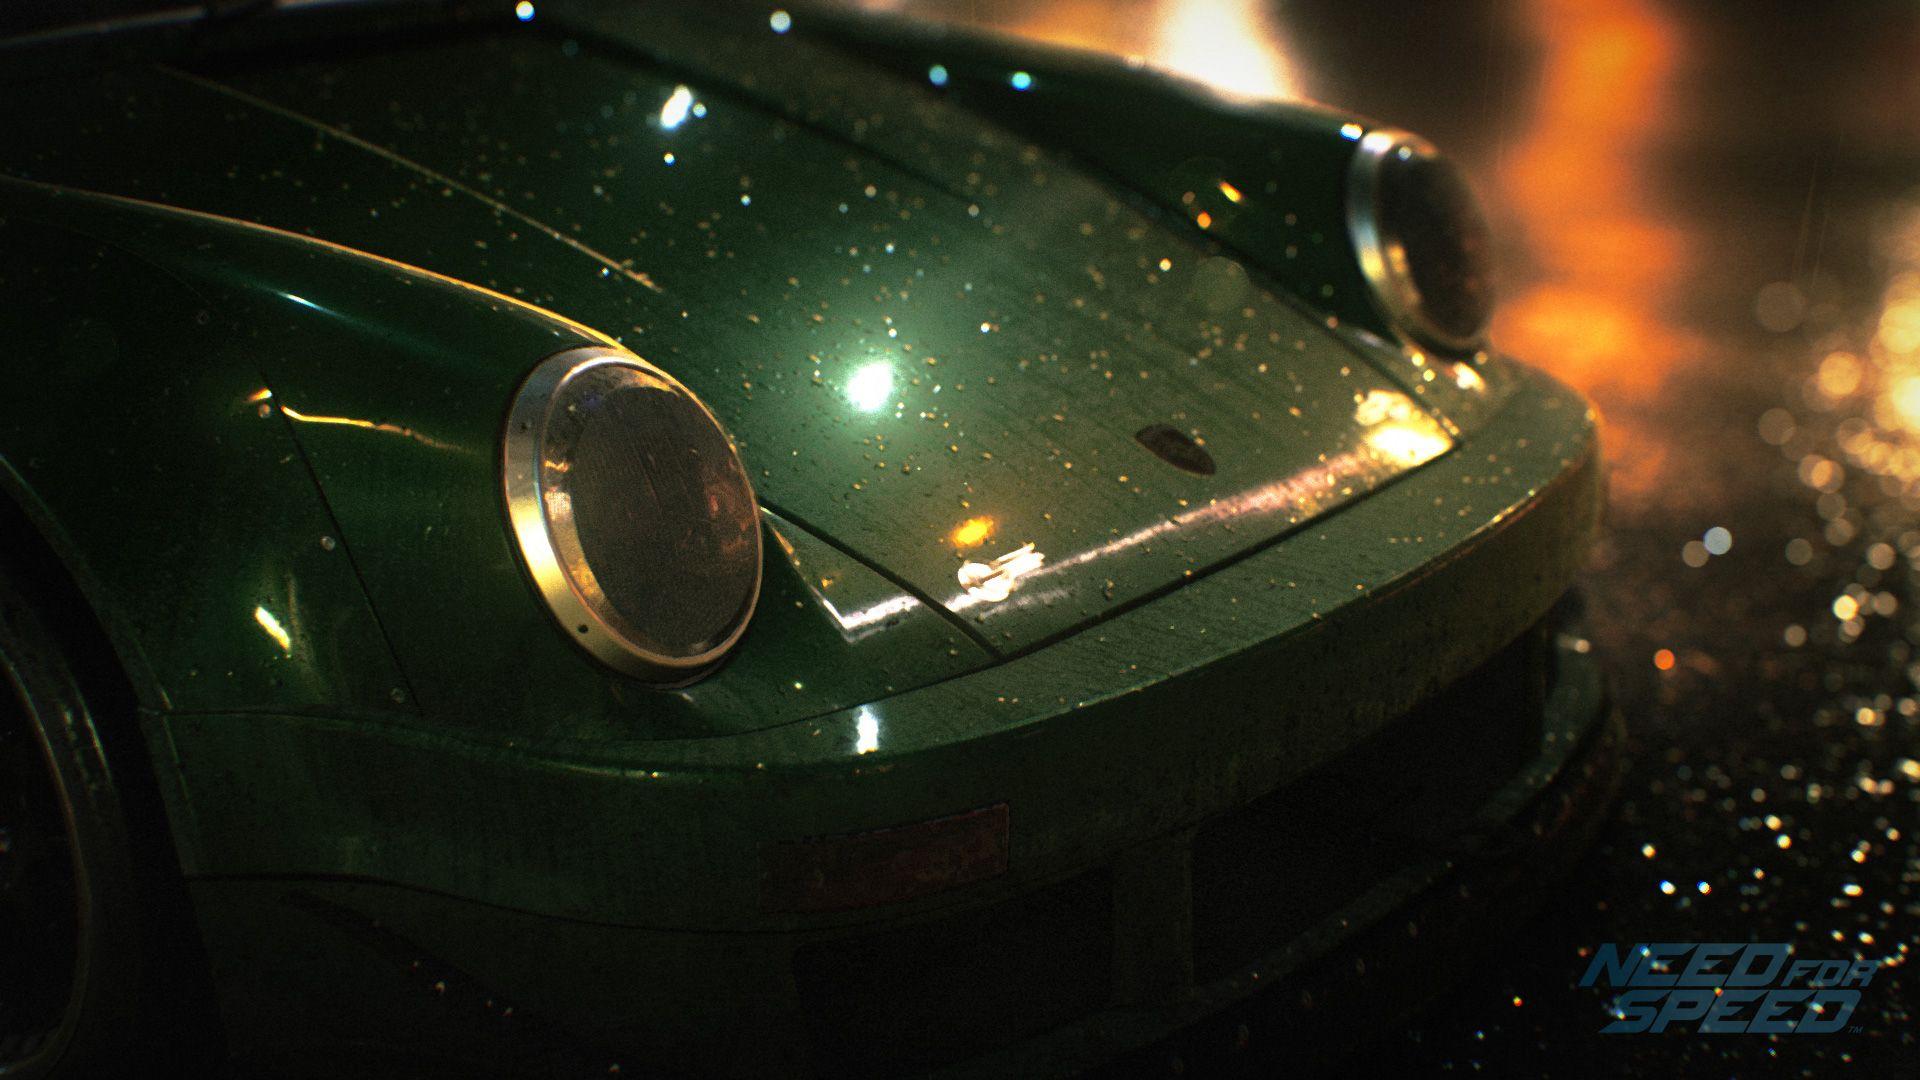 get need for speed 2015 for free mac